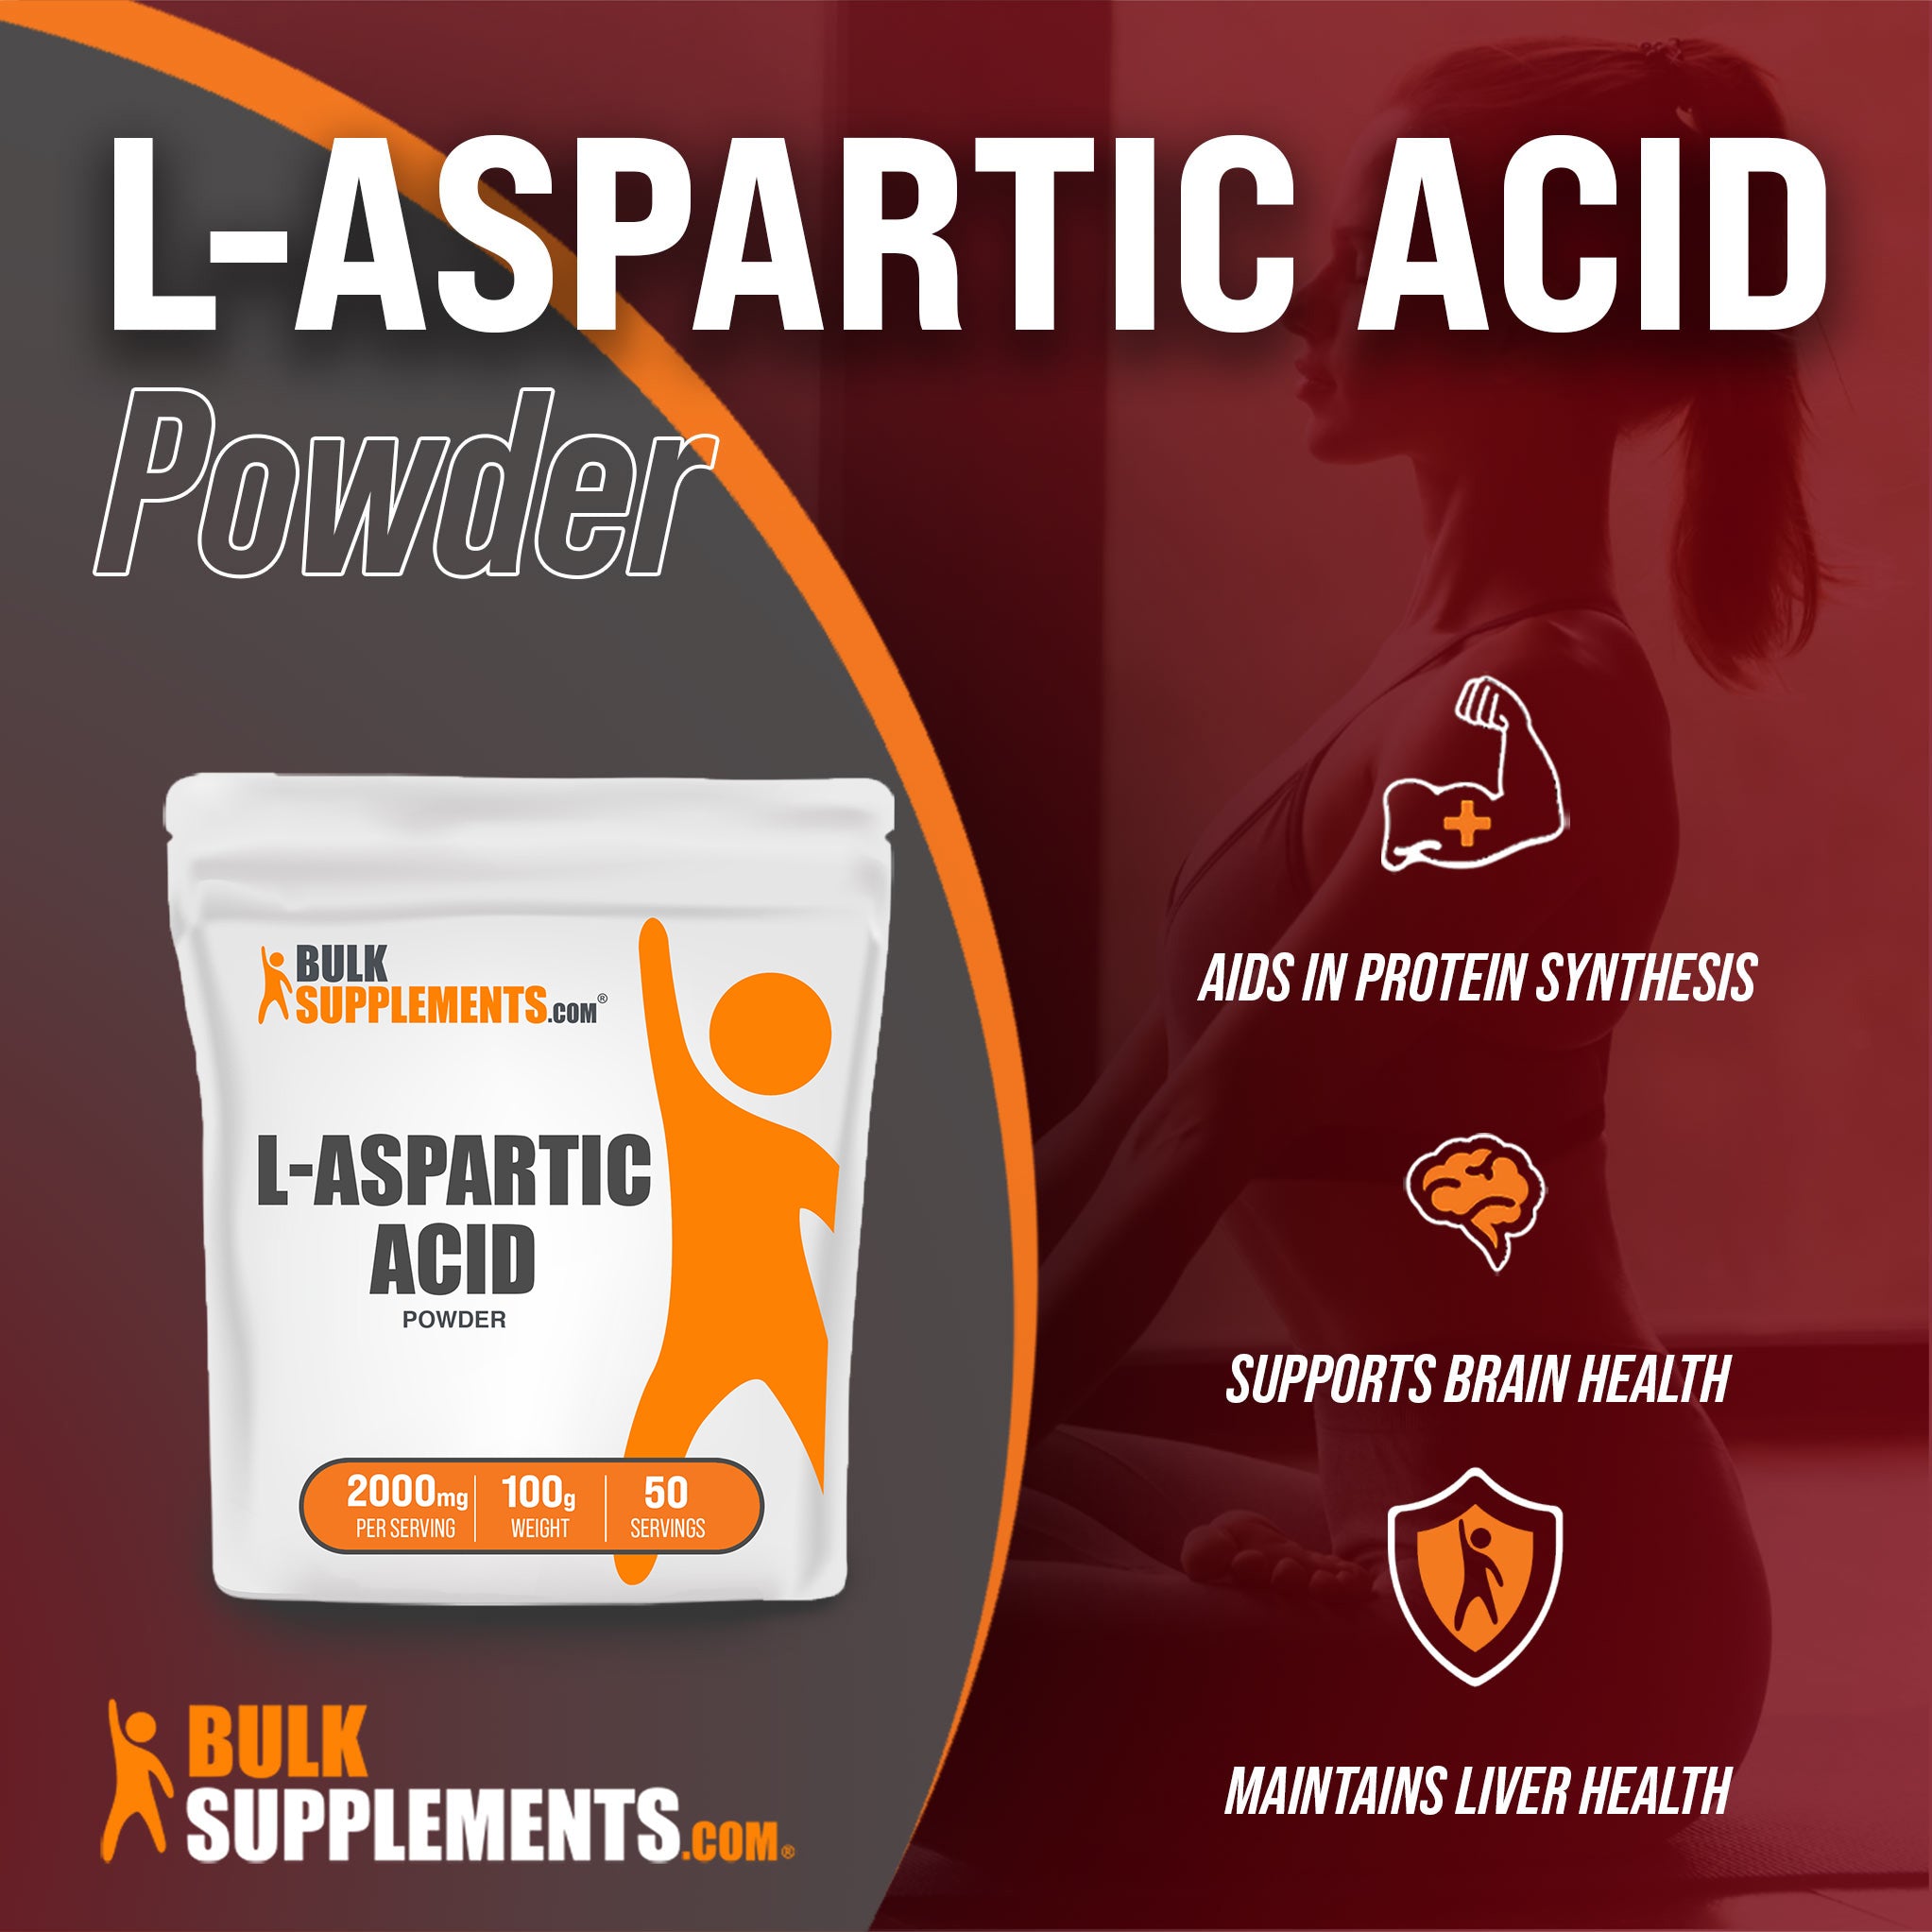 Benefits of L-Aspartic Acid: aids in protein synthesis, supports brain health, maintains liver health